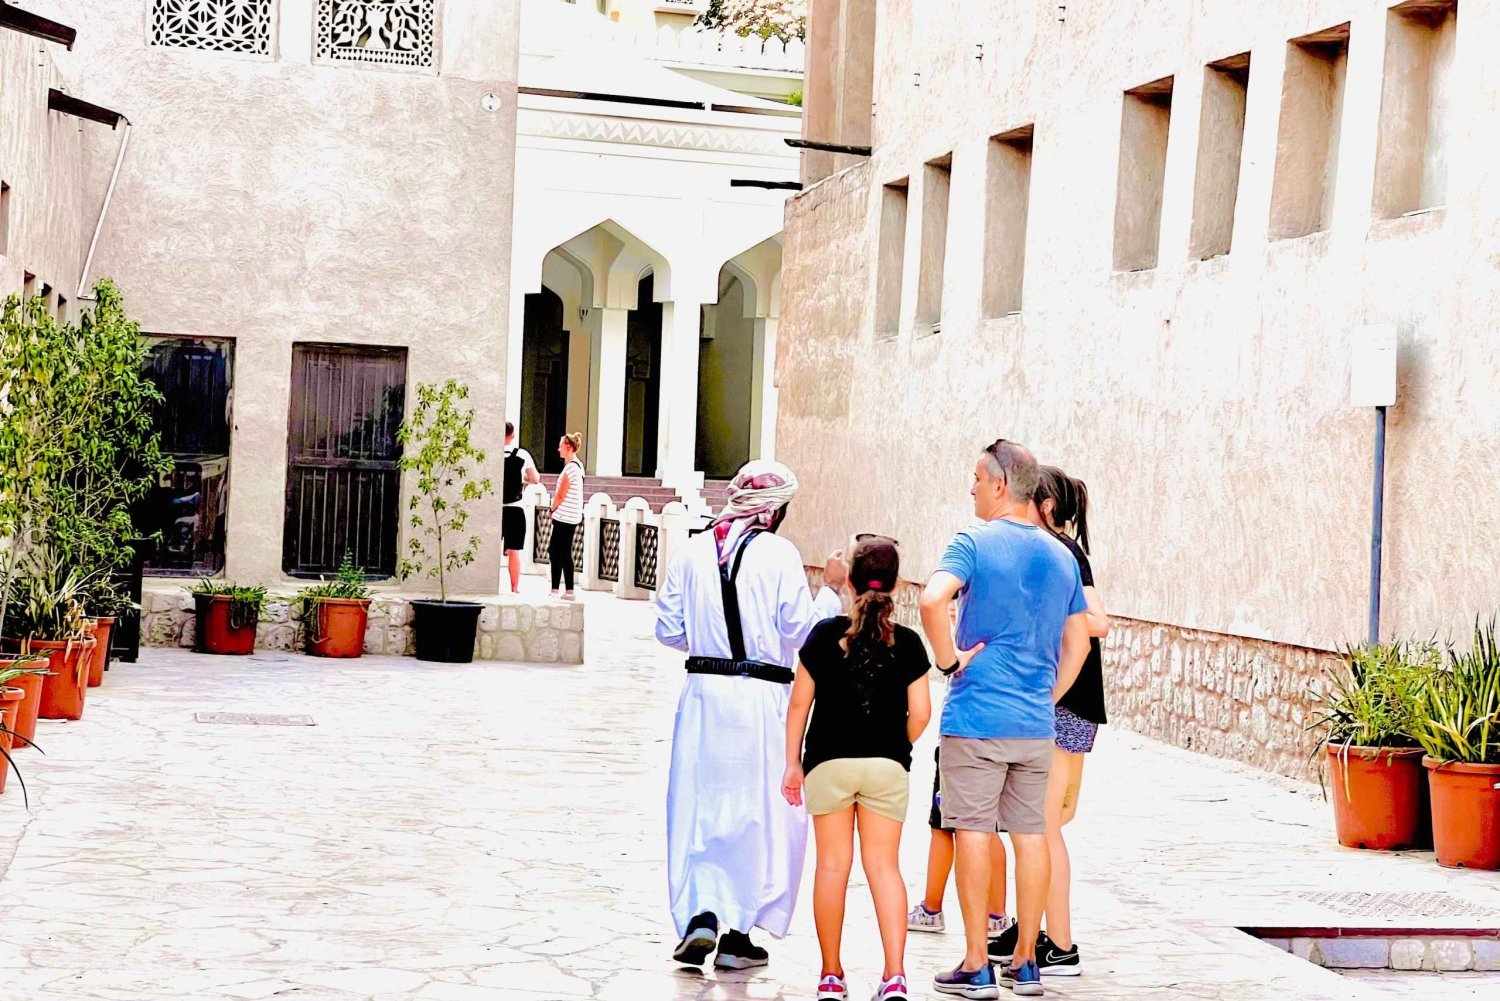 OLD DUBAI: Walking tour with a local, Markets & street food